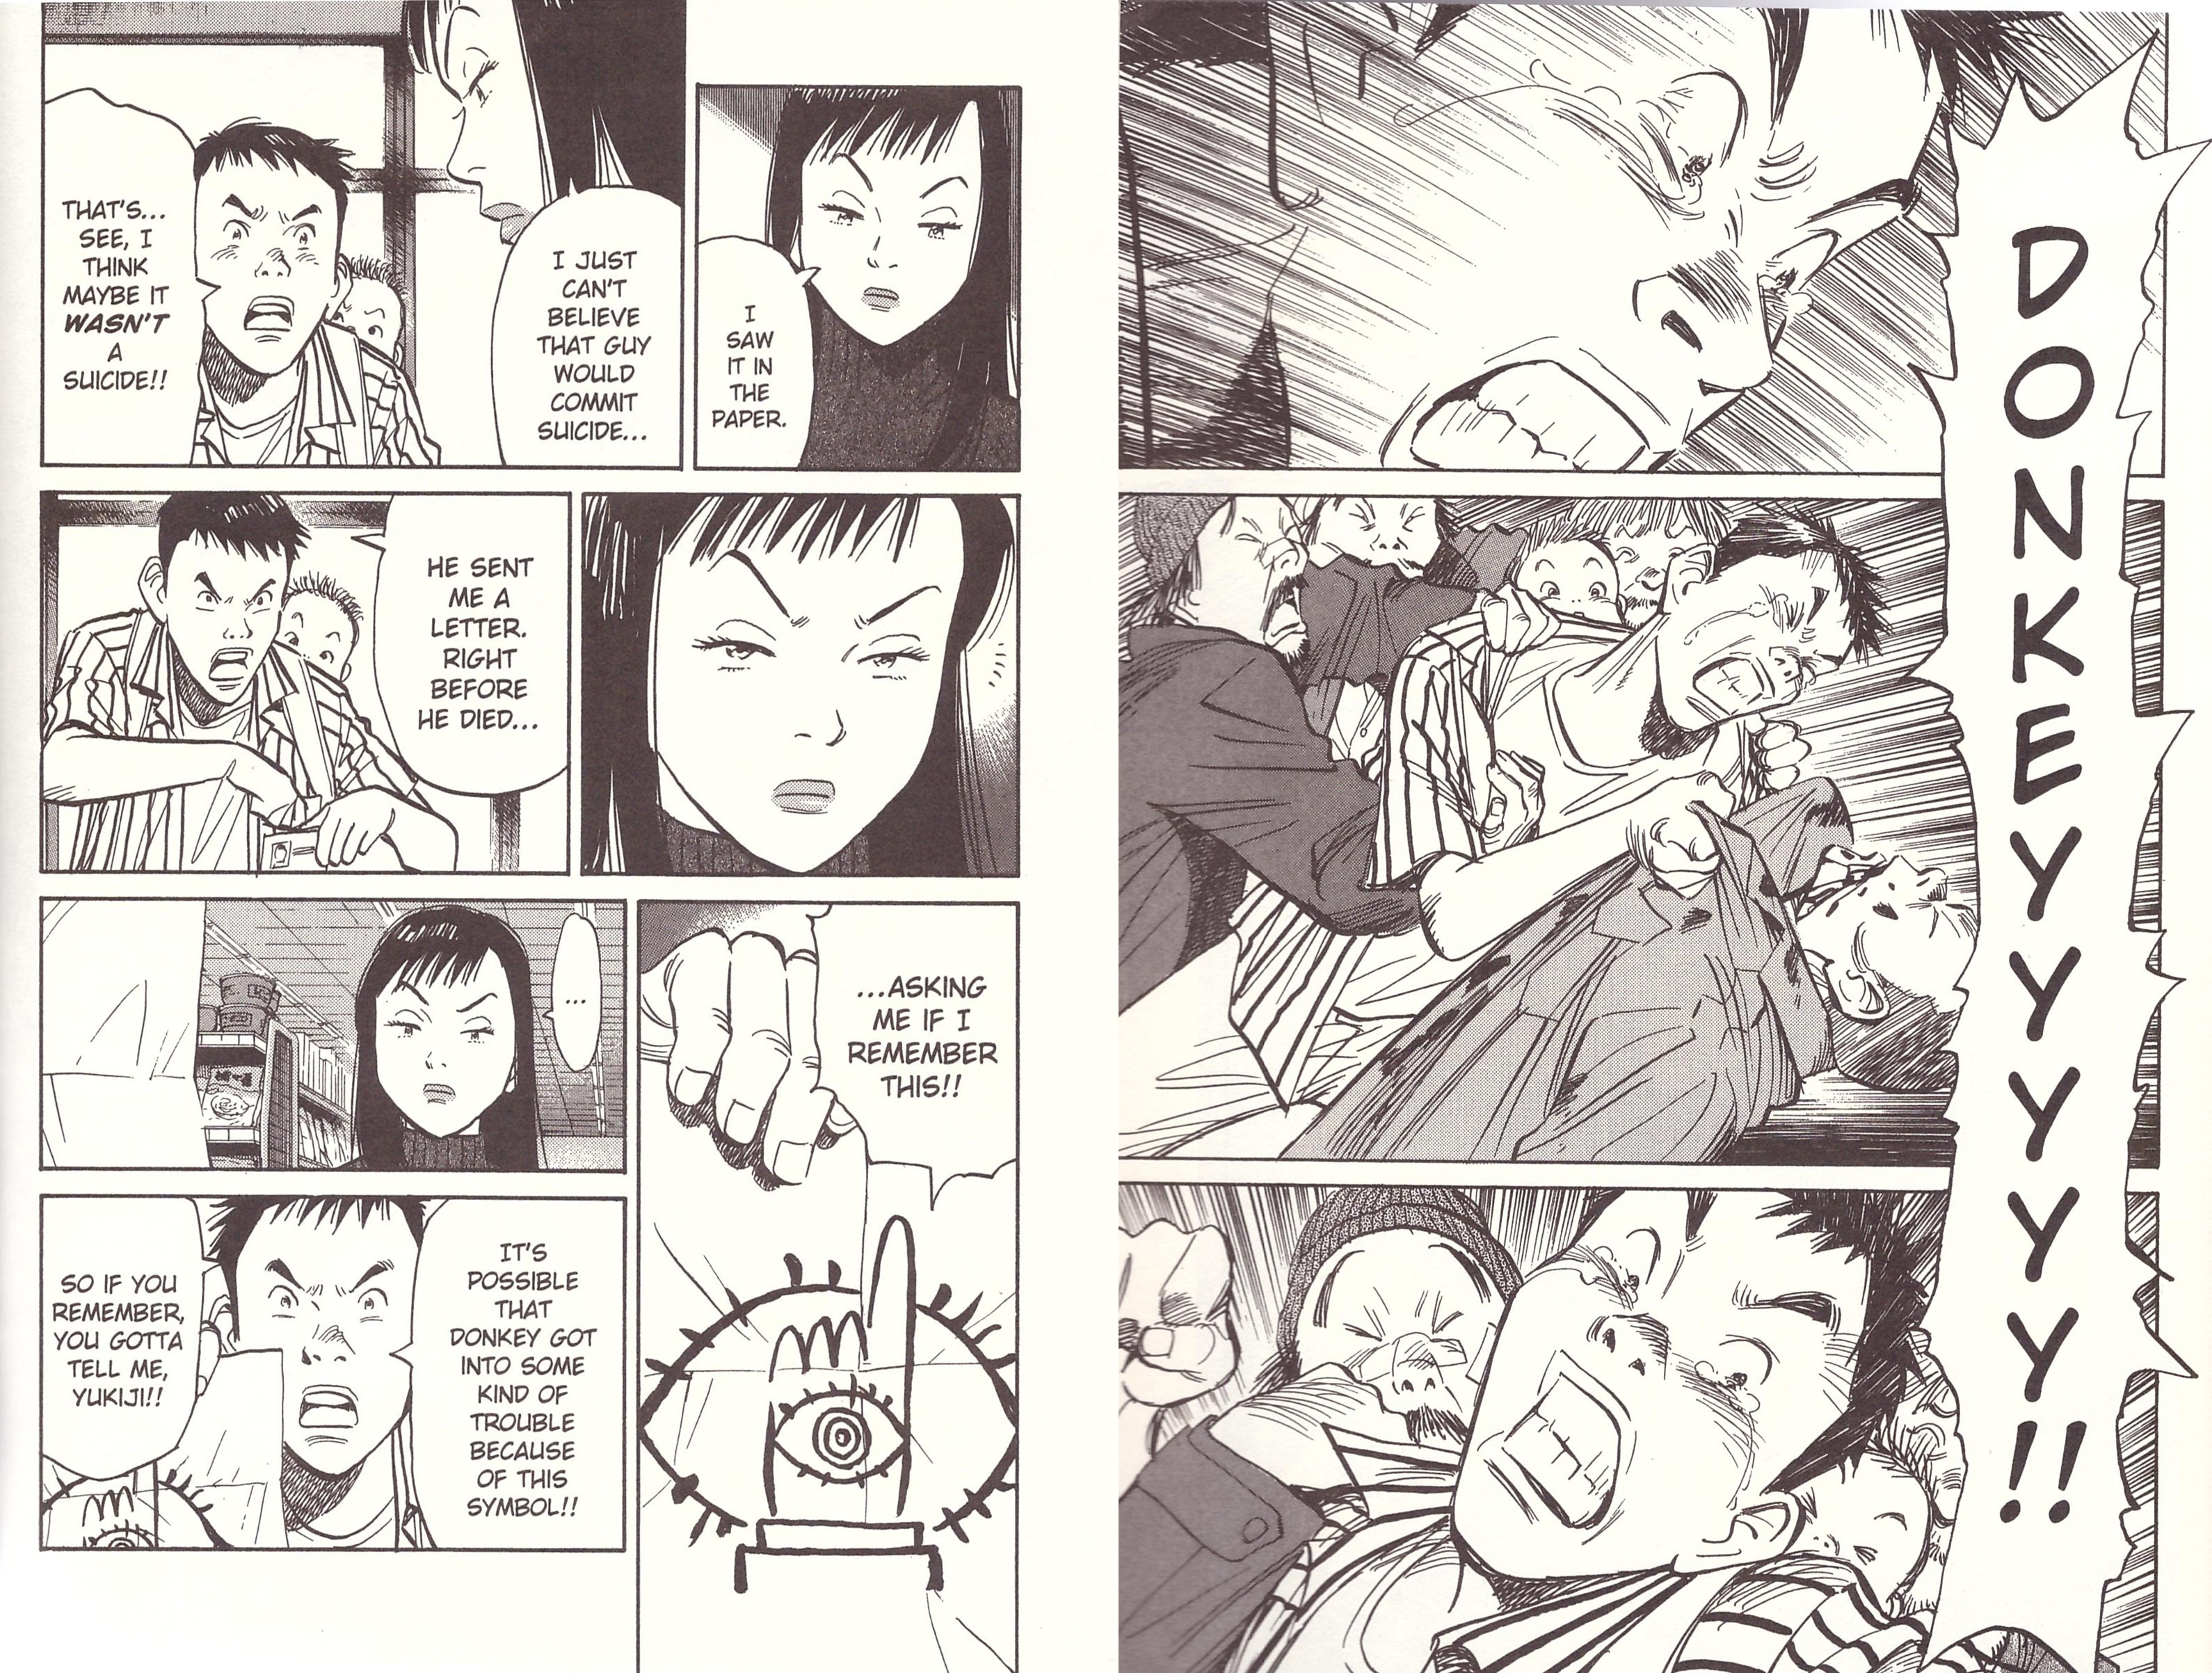 20th Century Boys 02 review